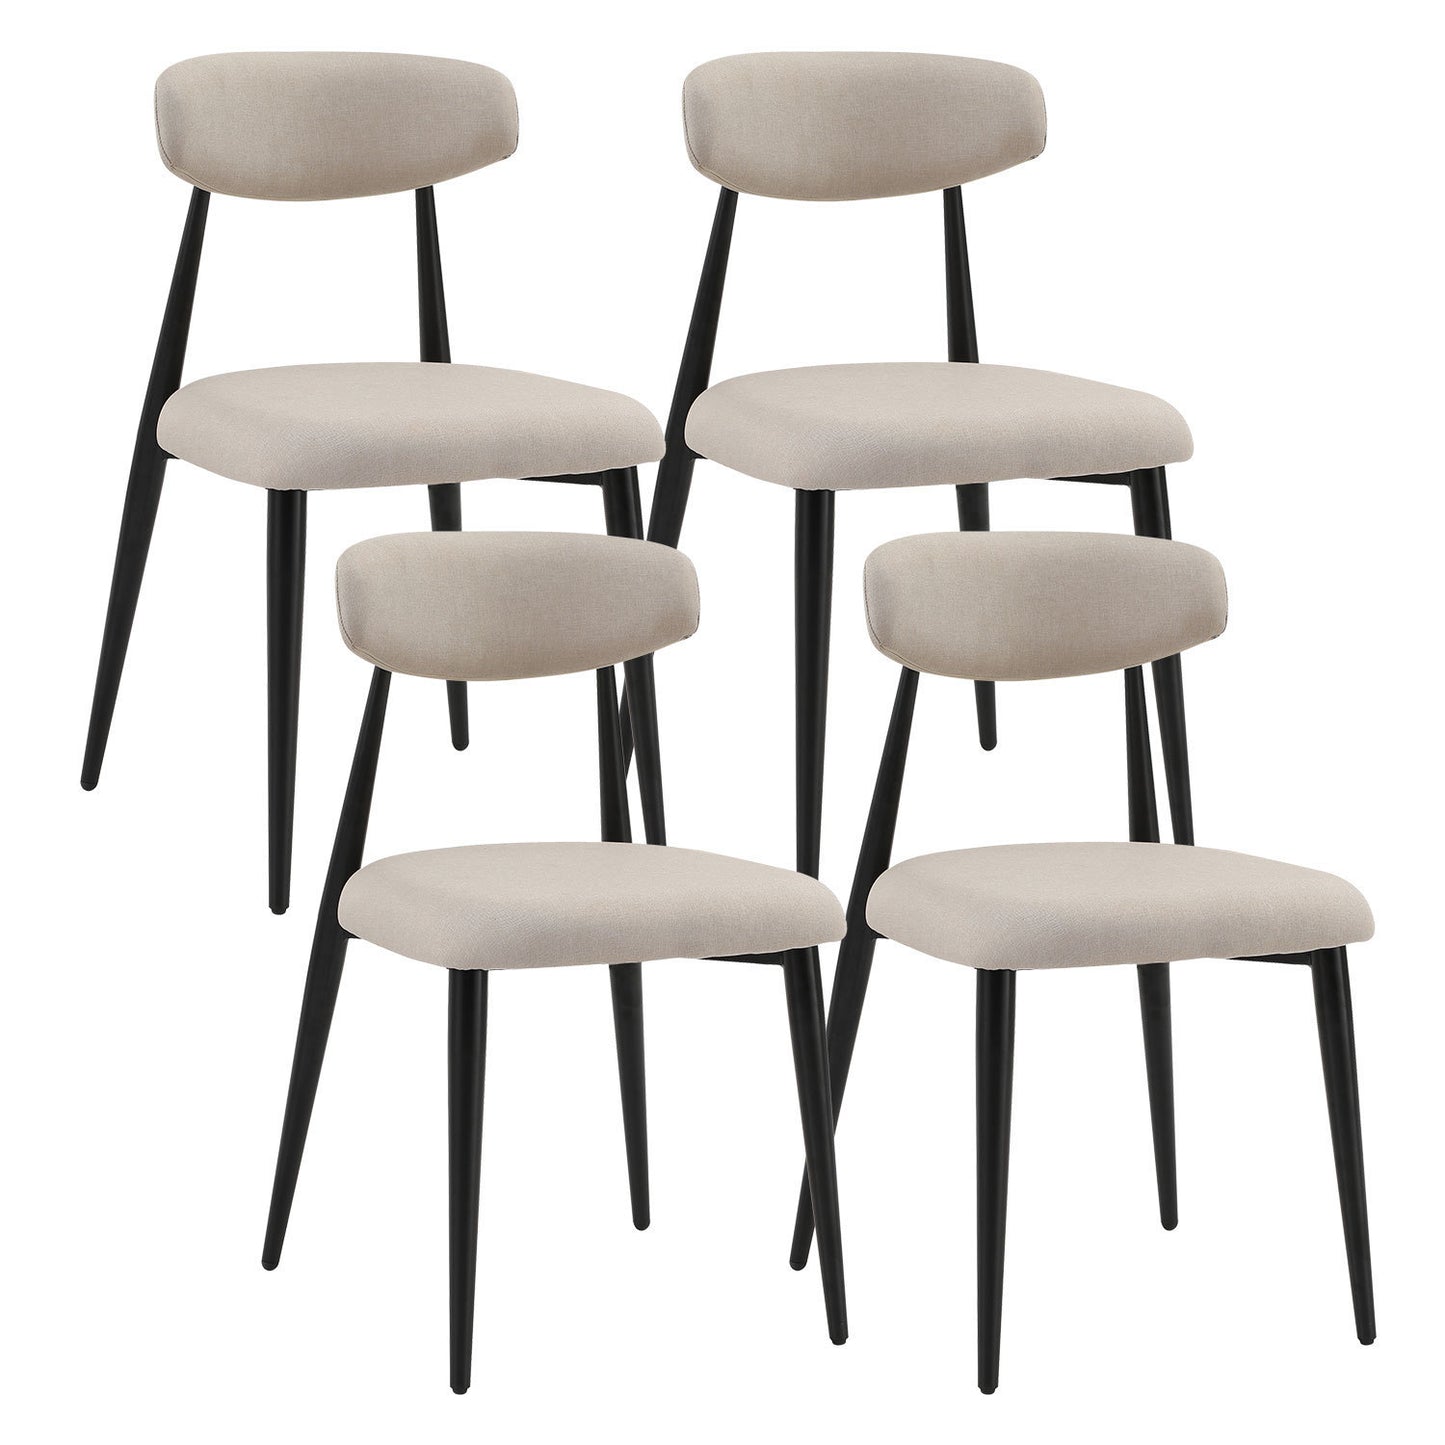 Dining Chairs set of 4, Upholstered Chairs with Black Metal Frame (Light Grey)